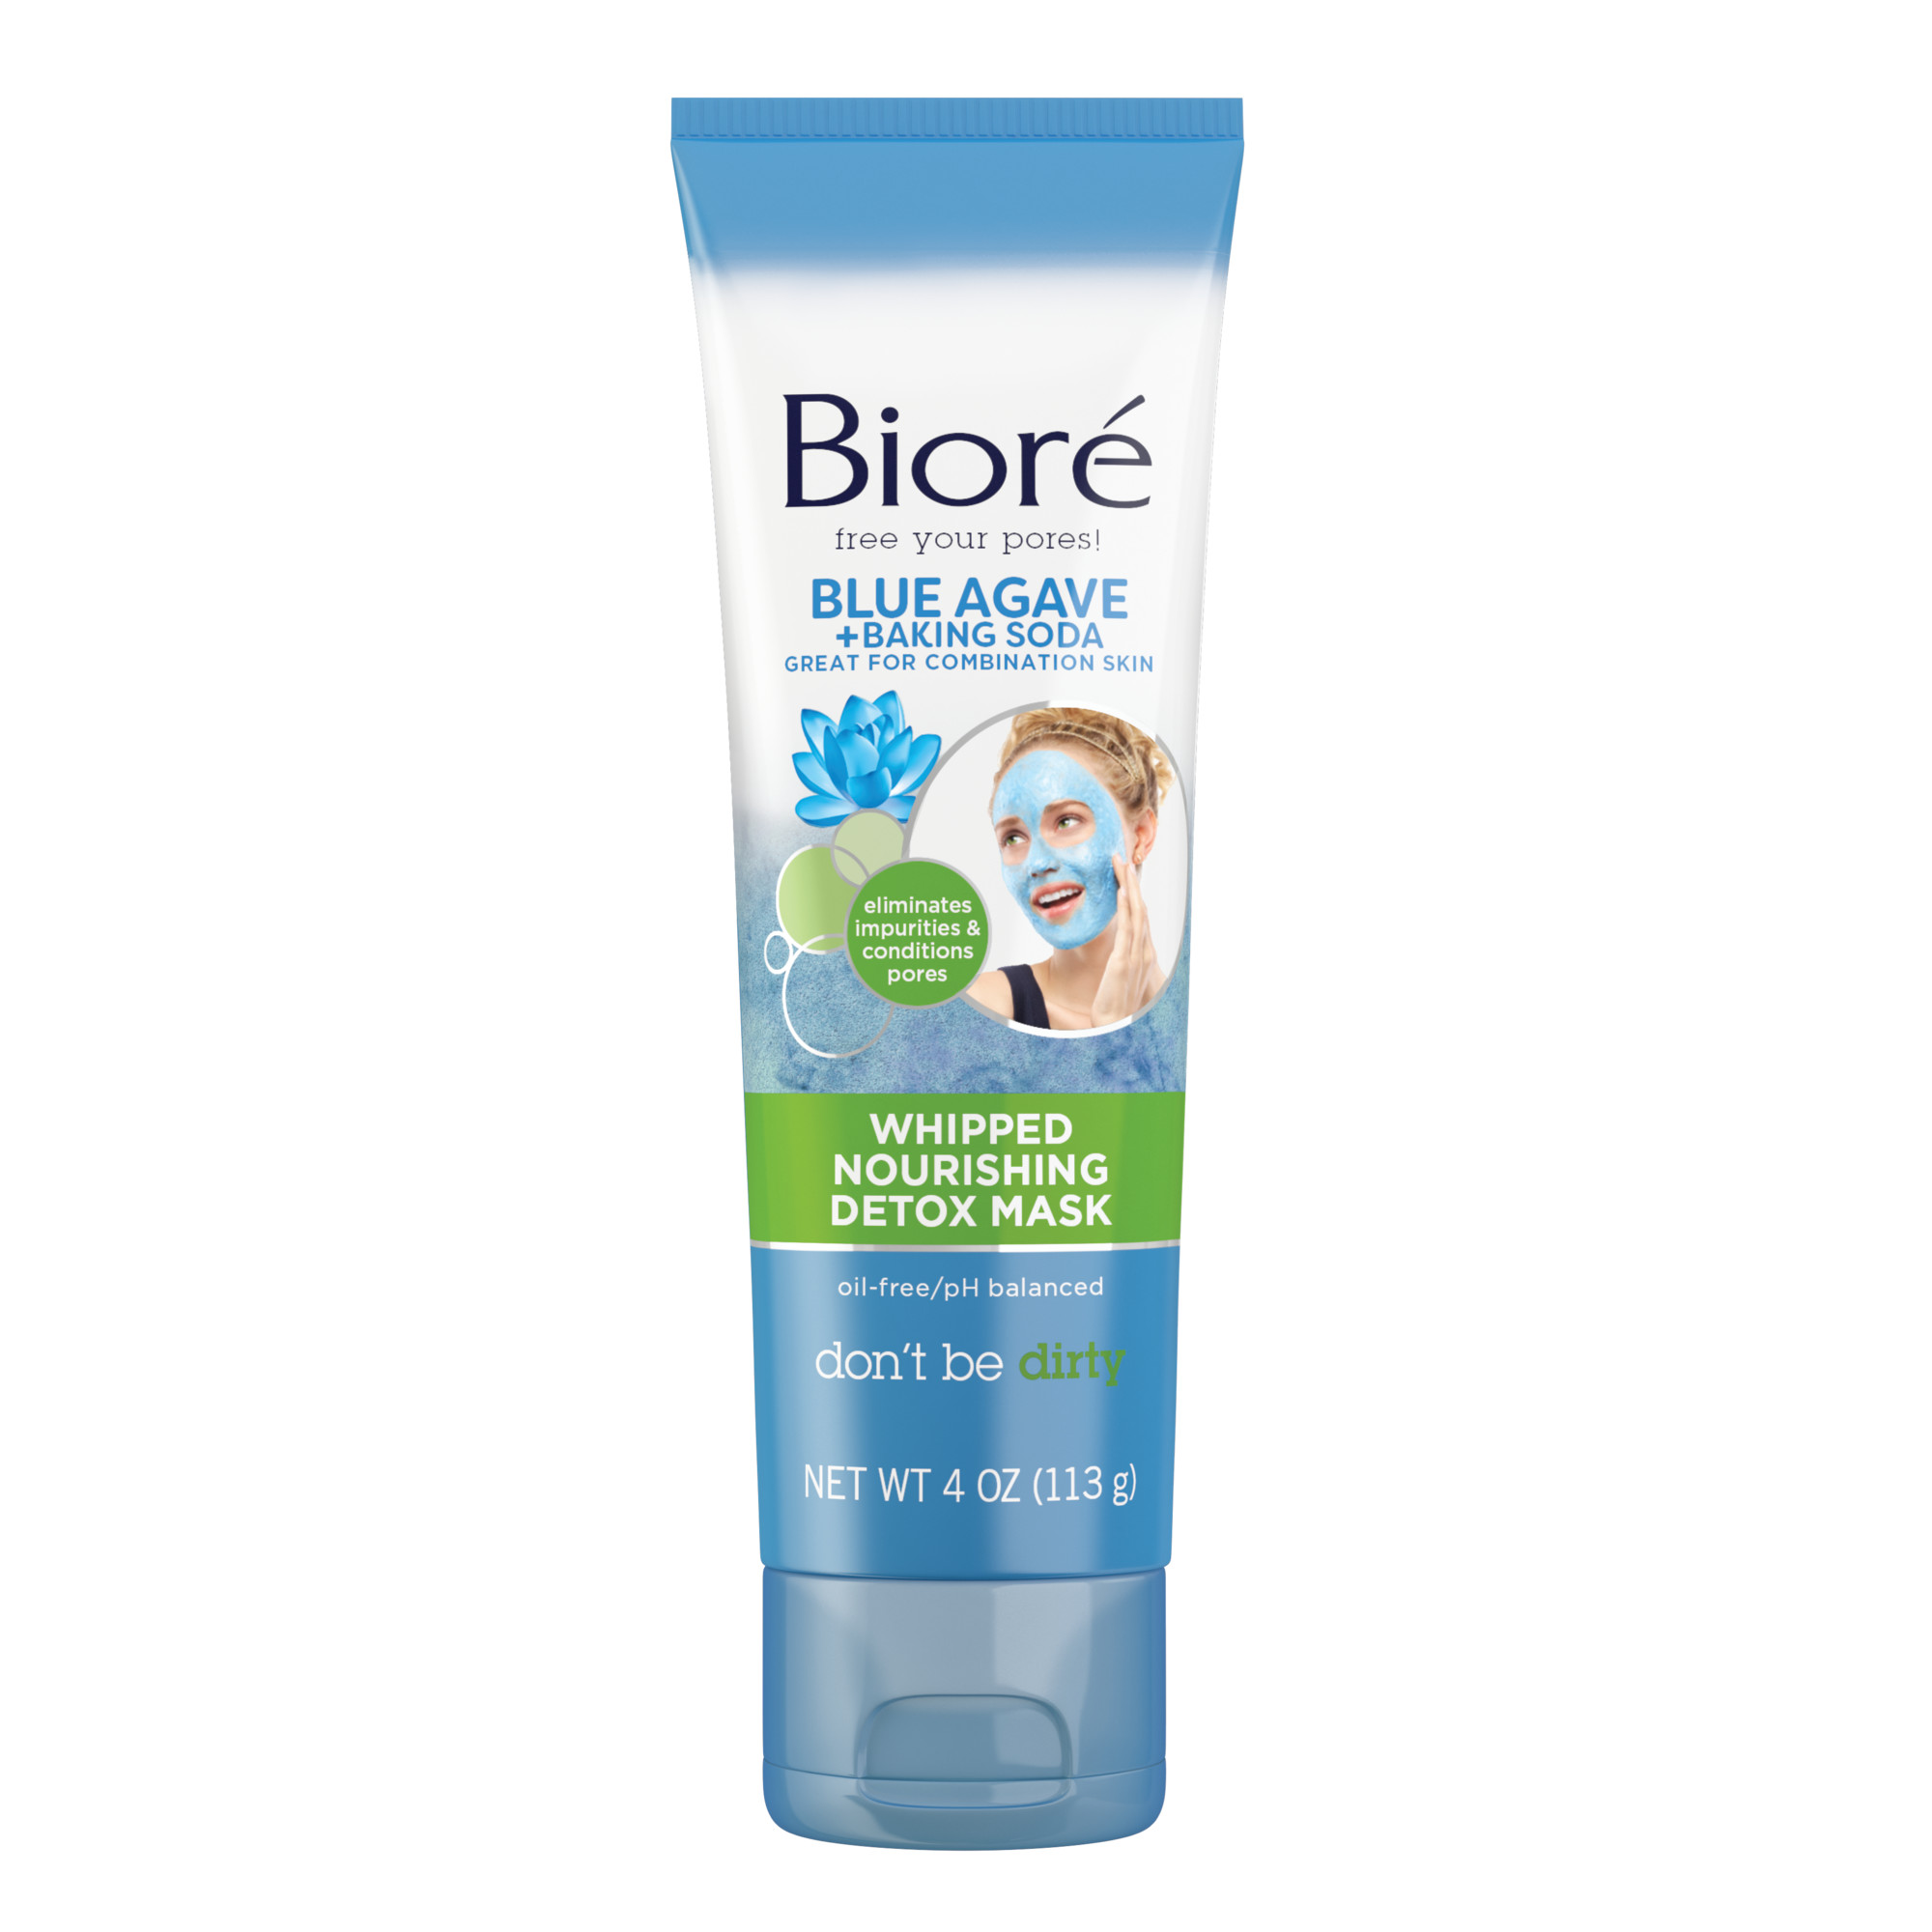 Biore Blue Agave & Baking Soda Face Mask for Combination Skin, Whipped Cooling Mask, 4 fl oz - image 1 of 2